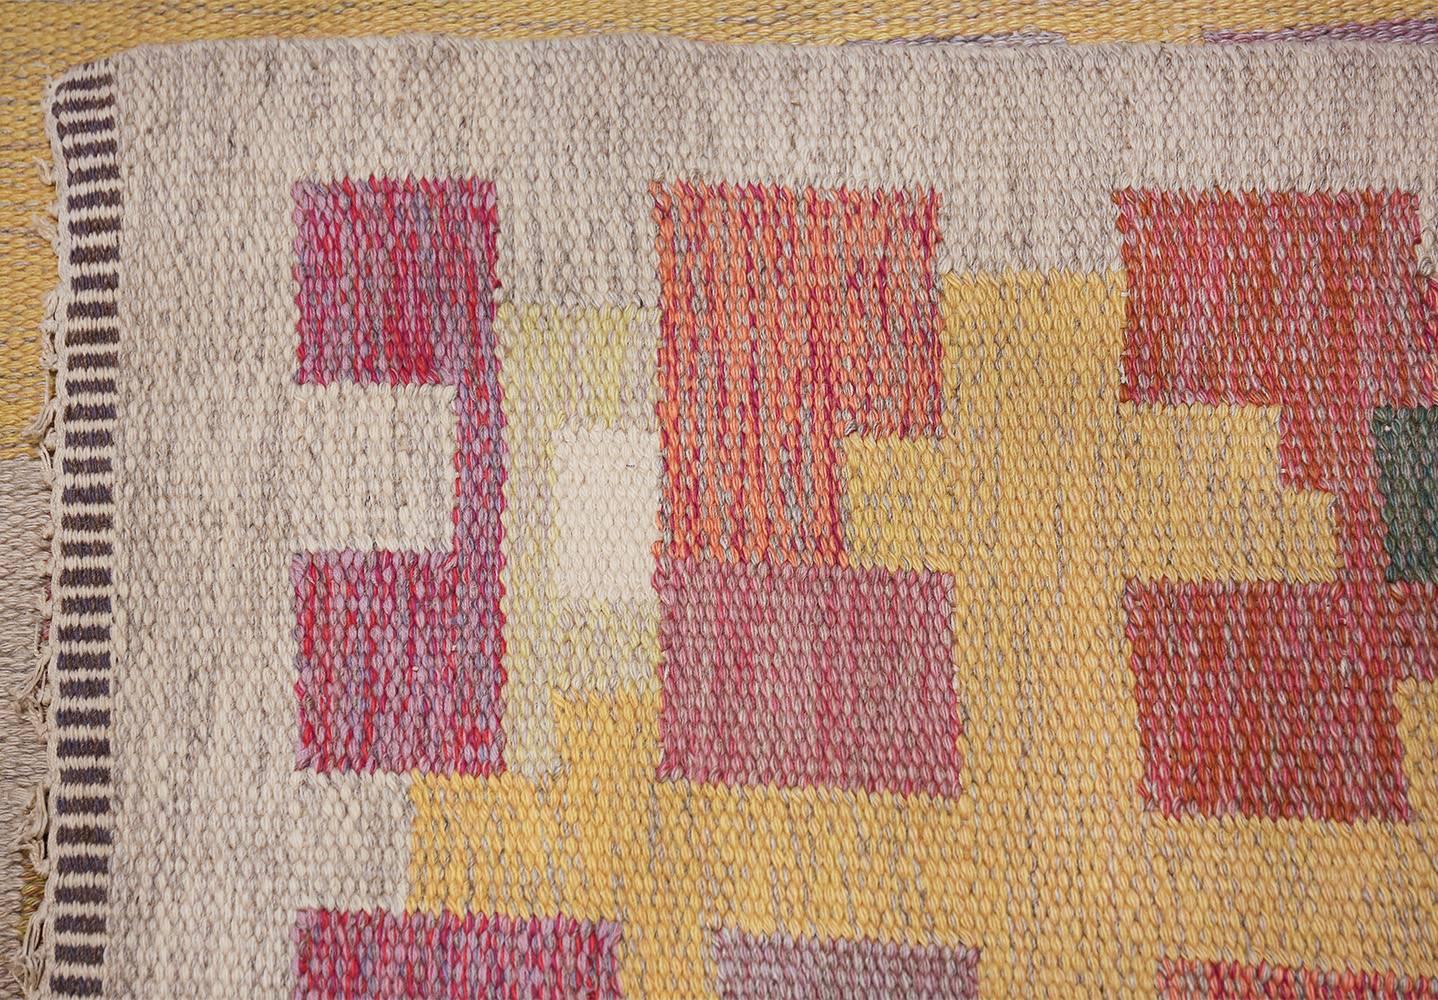 Hand-Woven Vintage Scandinavian Rug by Agda Osterberg